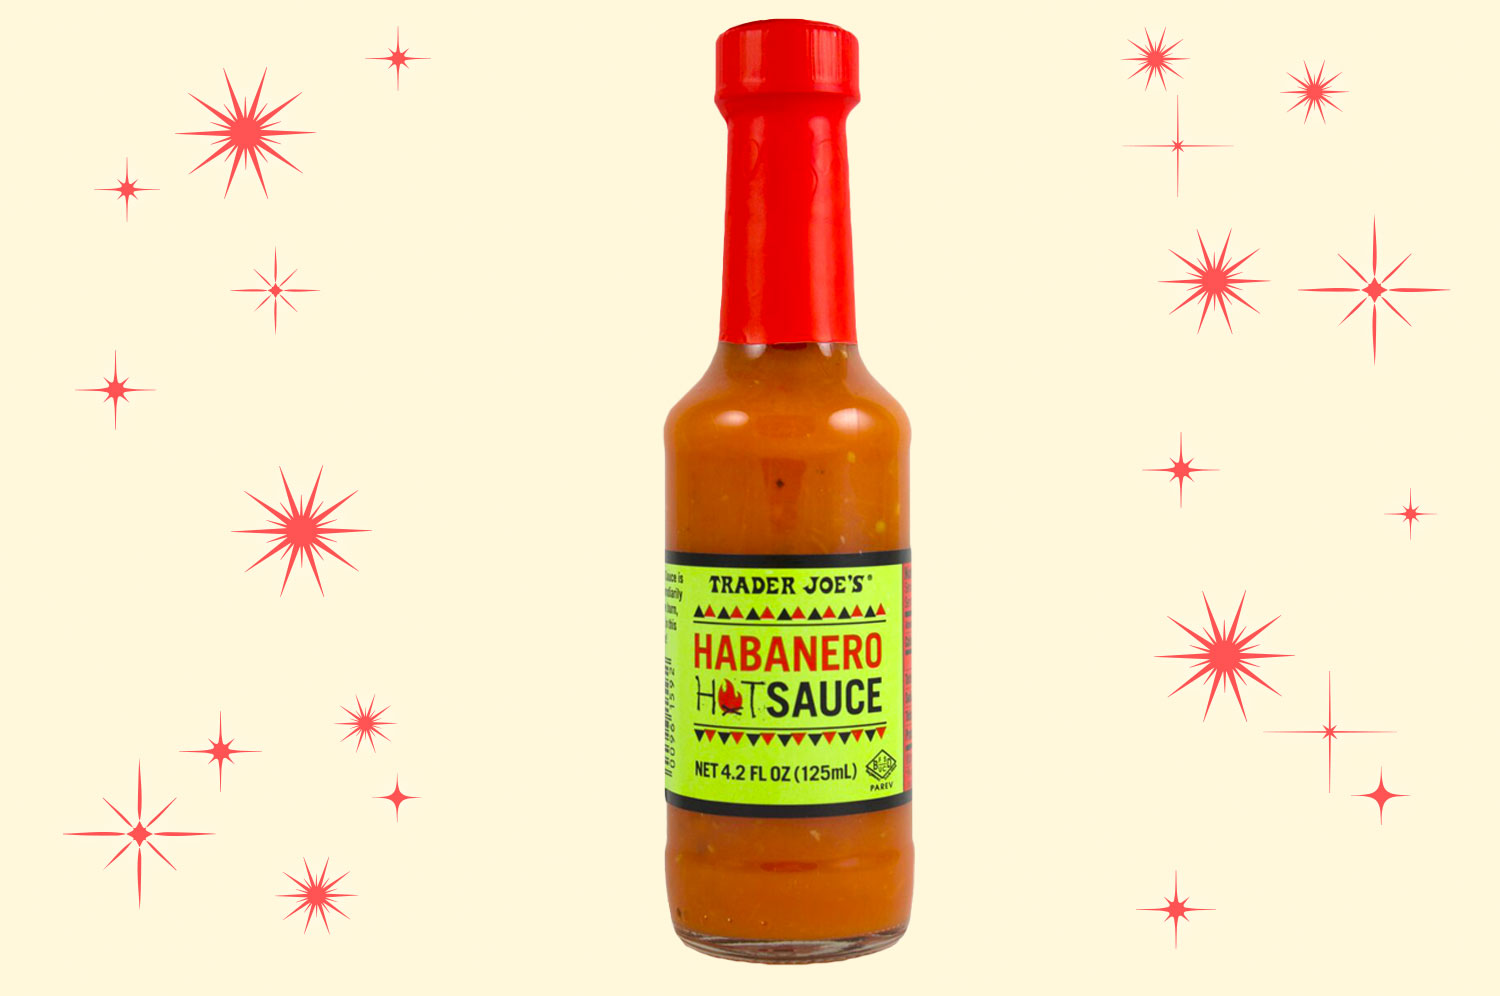 A bottle of Trader Joe’s habanero hot sauce with a fluorescent green label and a red cap floating on an illustrated salmon-colored background with red, mid-century star bursts.